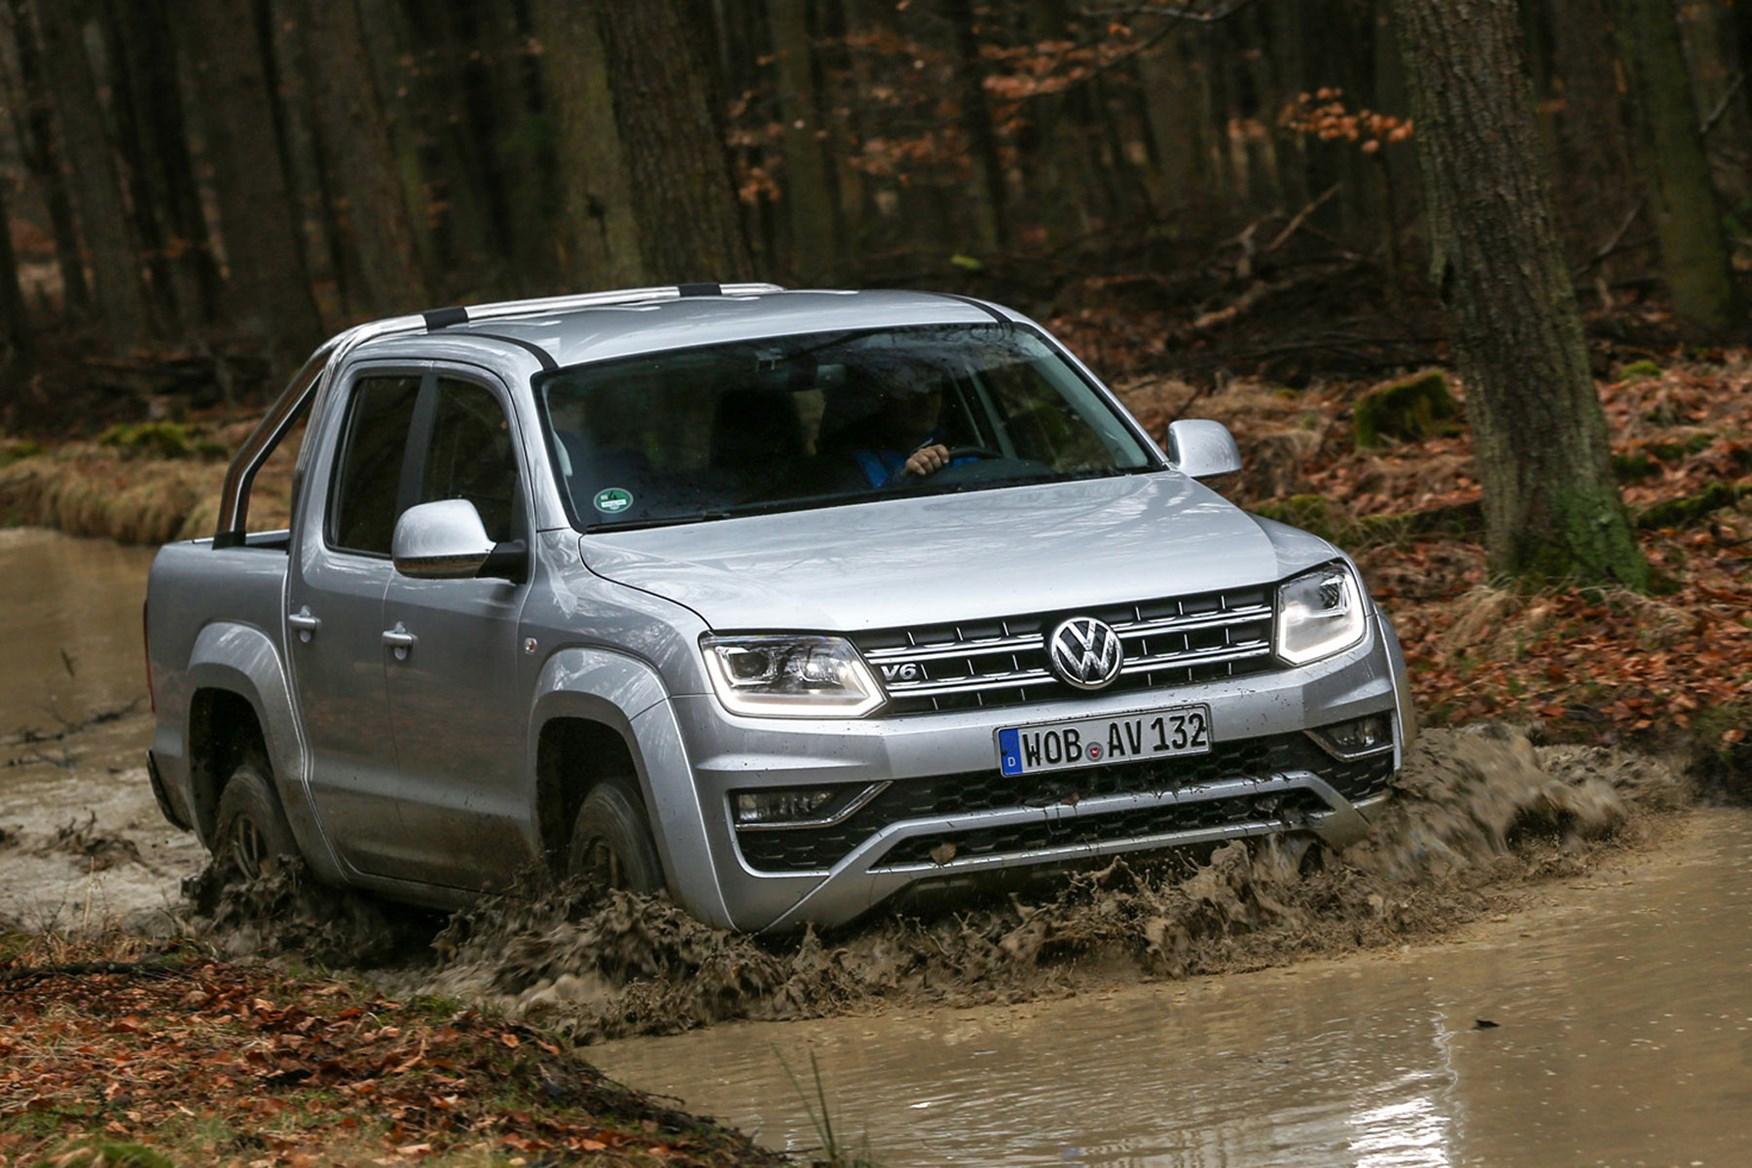 VW Amarok V6 Trendline 204hp review - front view, driving through muddy river, silver